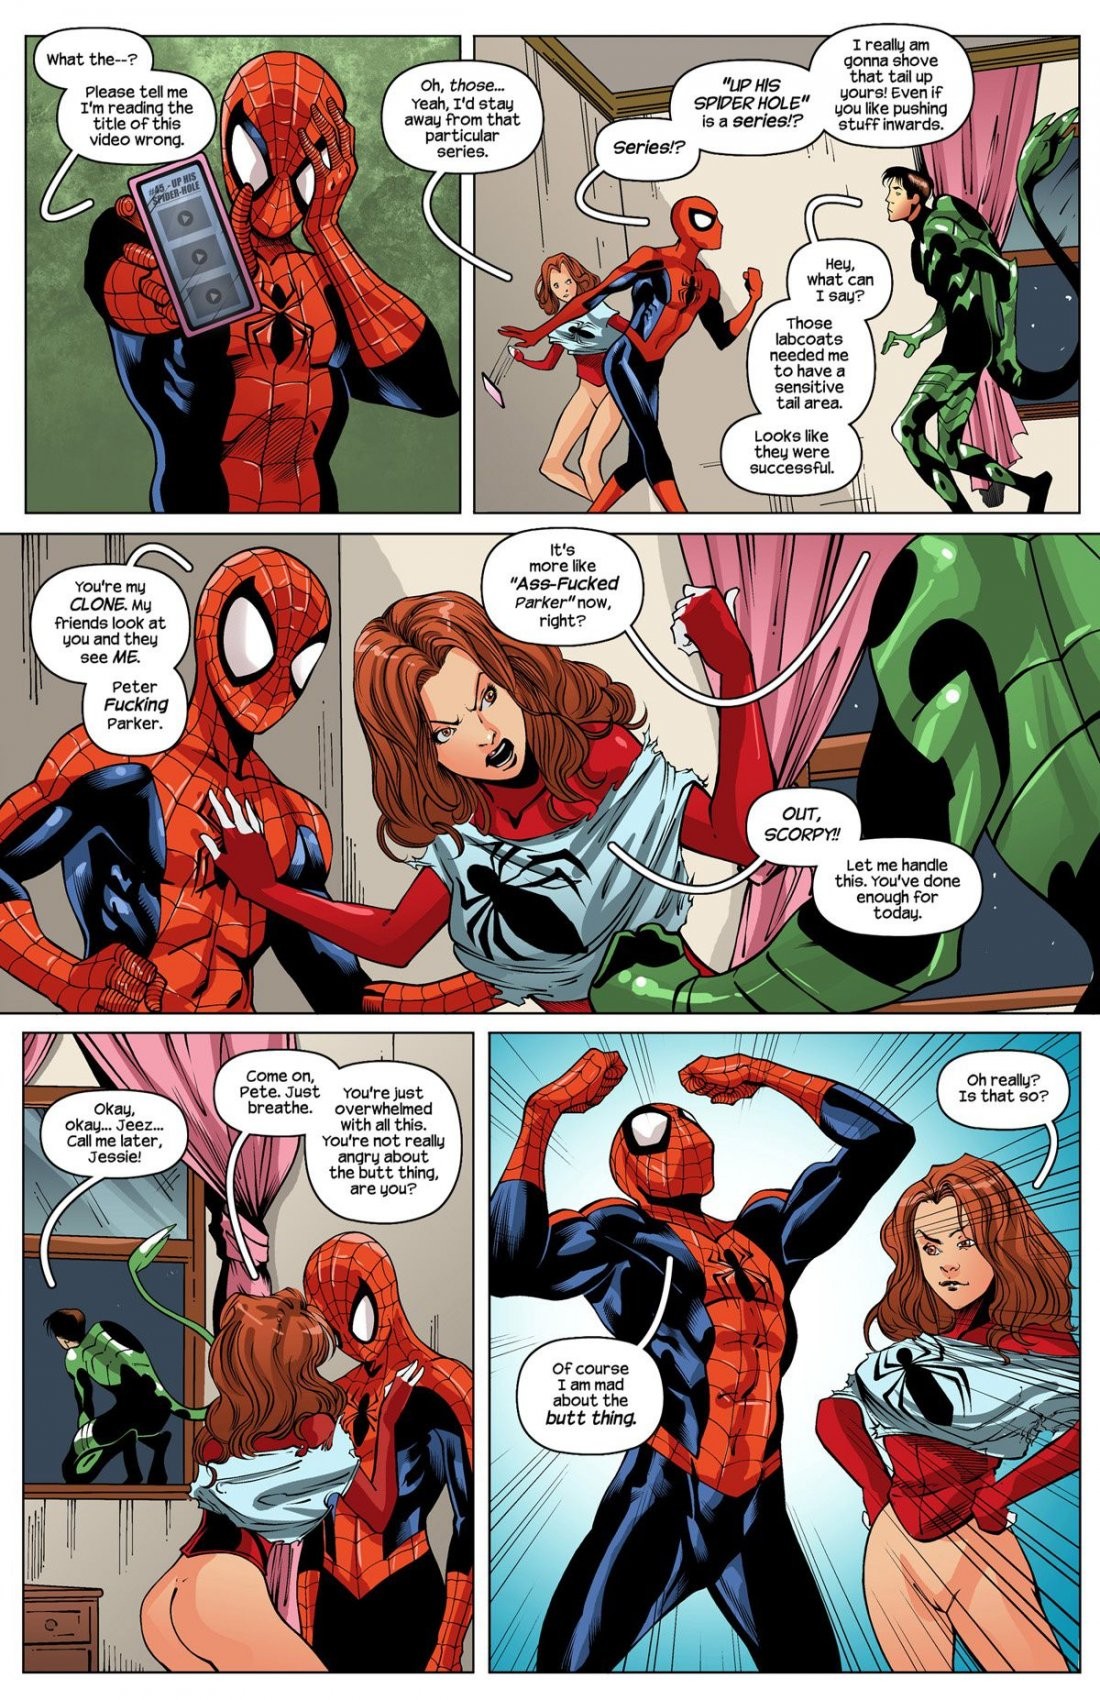 Ultimate Spider-Man XXX 12 - Spidercest - An itsy bitsy spider climbs up porn comic picture 4